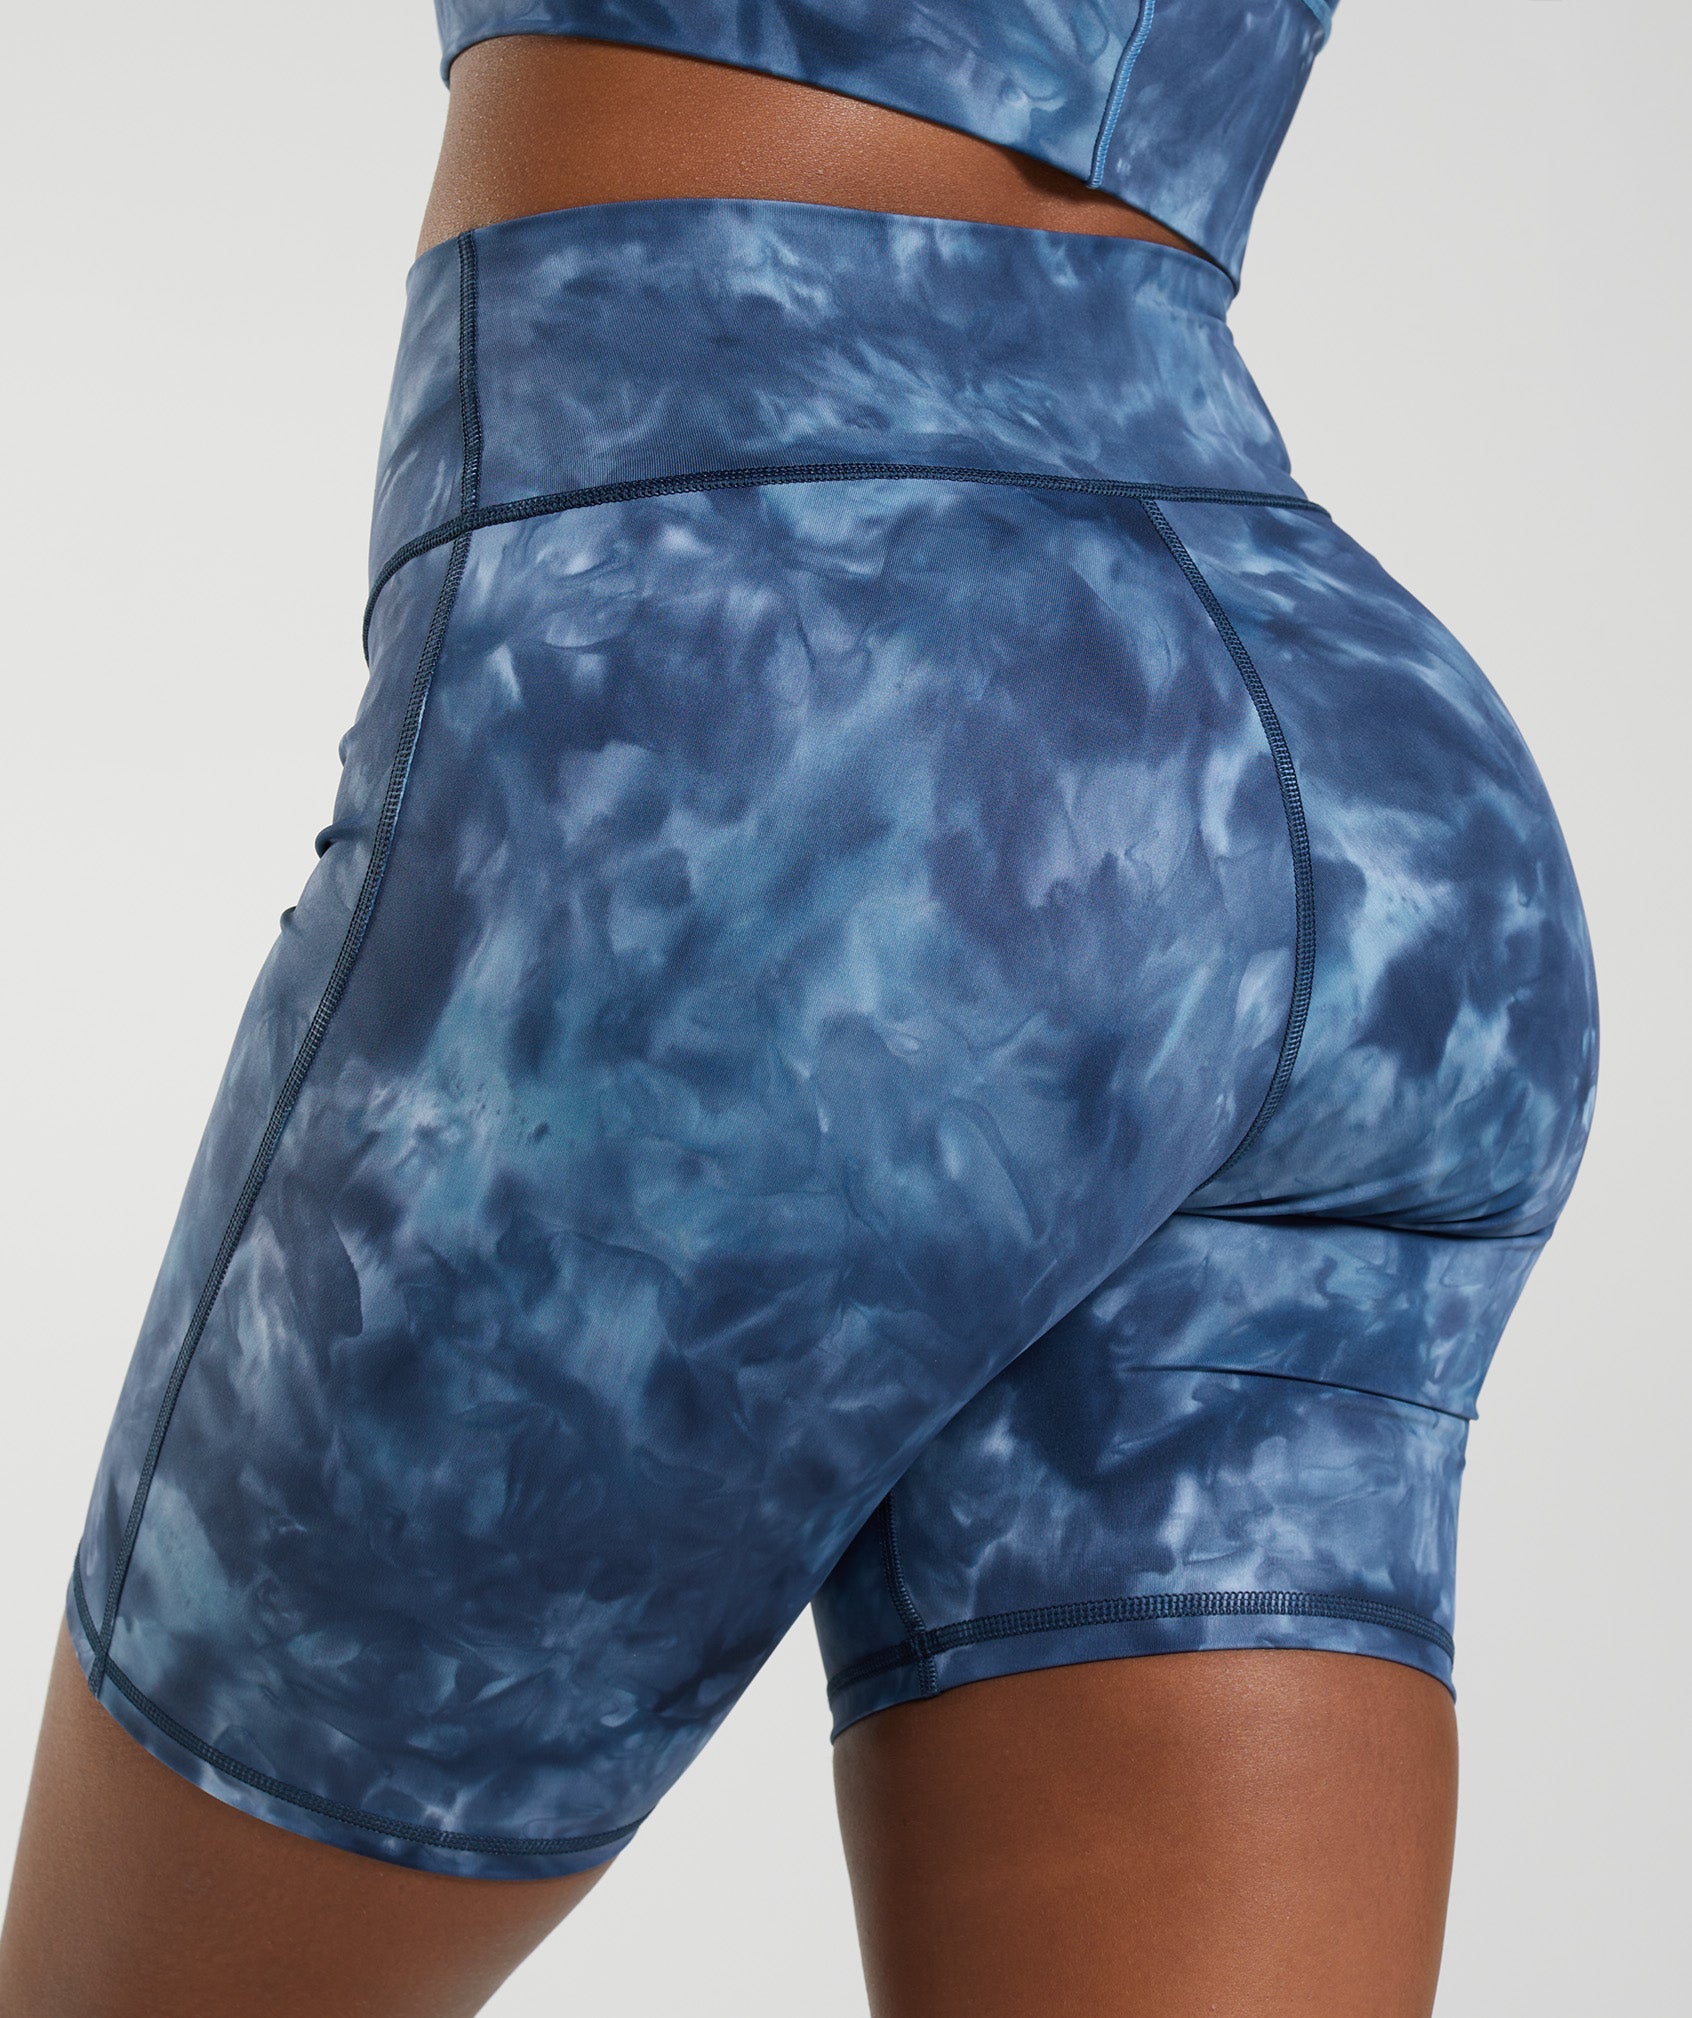 Elevate Cycling Shorts in Lakeside Blue Spray Dye - view 5